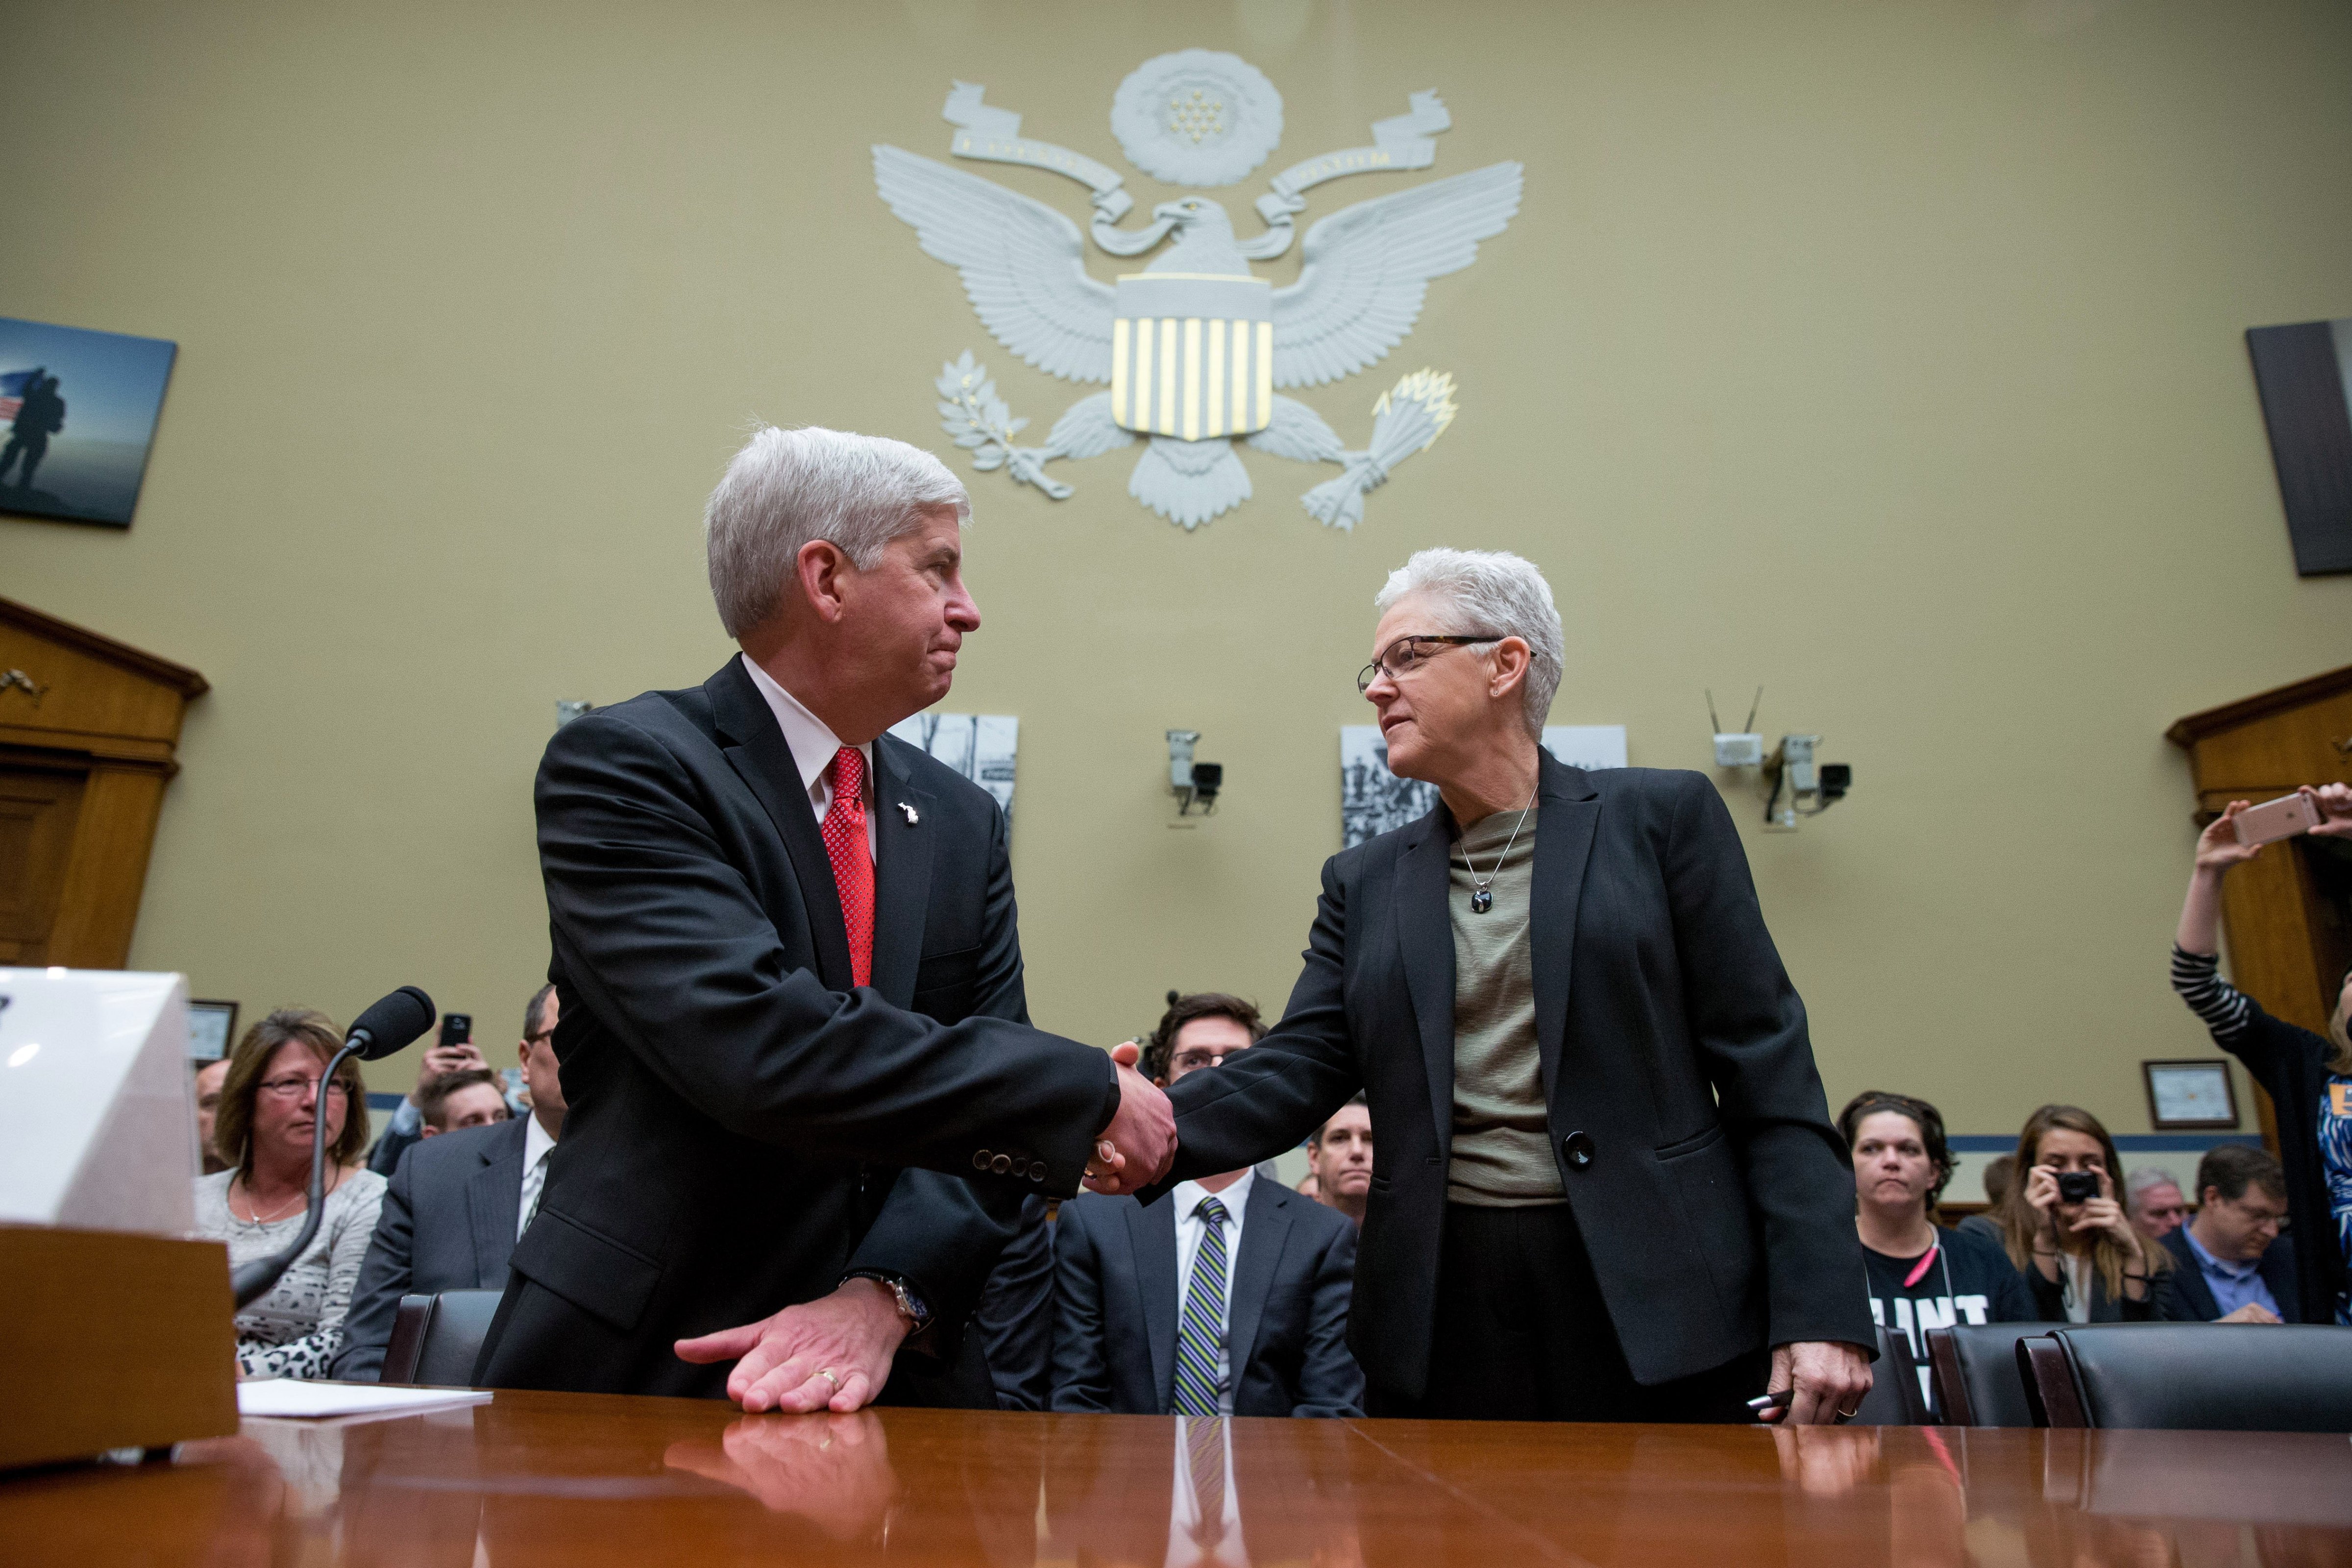 Michigan Gov. Rick Snyder and EPA Administrator Gina McCarthy greet each other as they arrive to testify before a House Oversight and Government Reform Committee hearing in Washington on March 17, 2016, to look into the circumstances surrounding high levels of lead found in many residents' tap water in Flint, Michigan. (Andrew Harnik—AP)